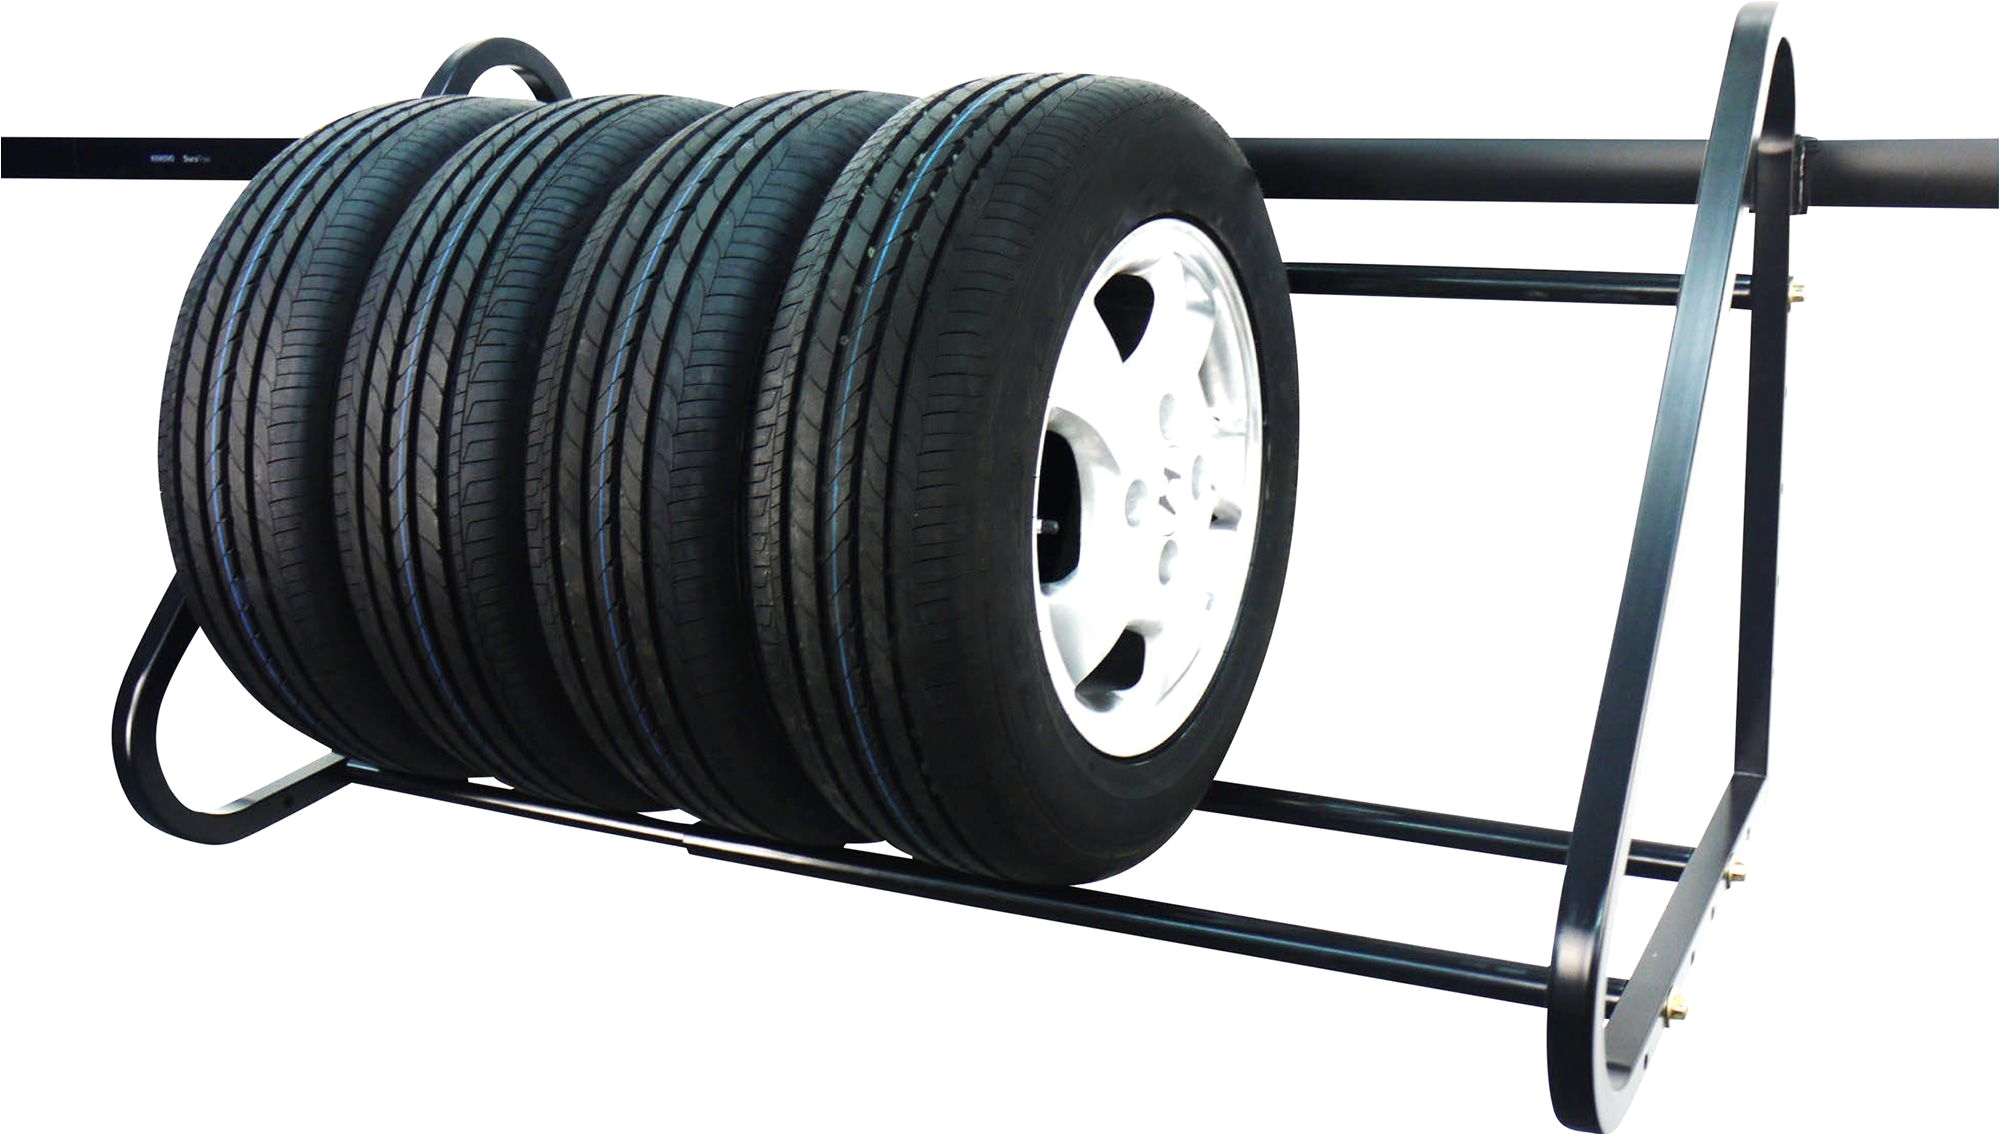 Motorcycle Tire Rack for Trailer 440 Lb Adjustable Wall Mount Tire Rack Shop Pinterest Tire